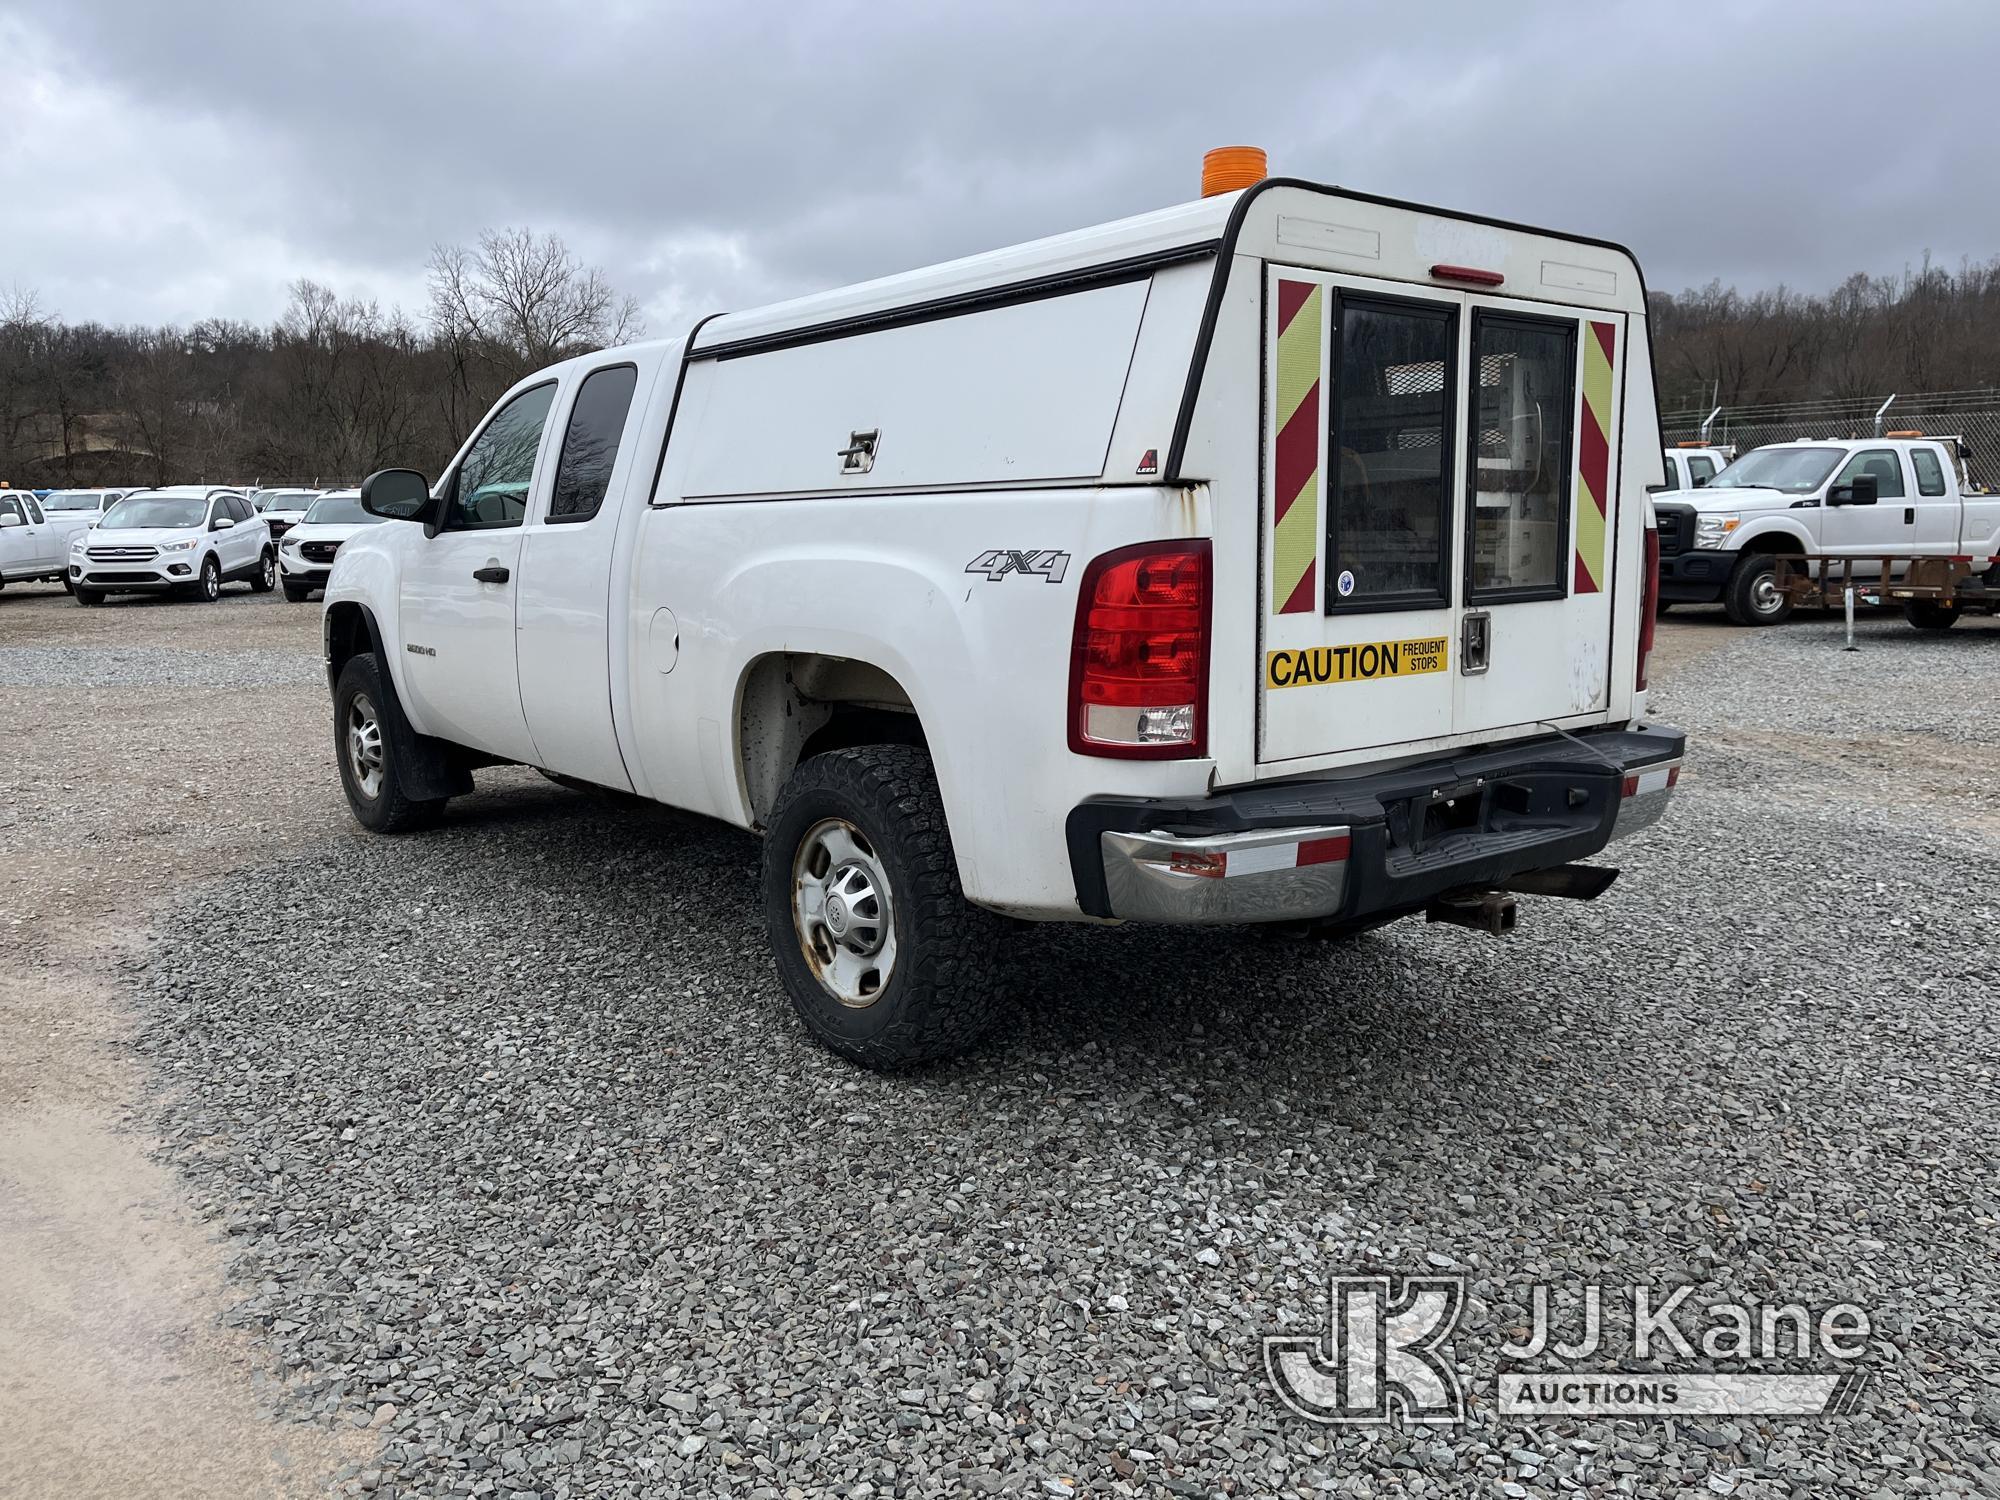 (Smock, PA) 2012 GMC Sierra 2500HD 4x4 Extended-Cab Pickup Truck Title Delay) (Runs & Moves, Jump To